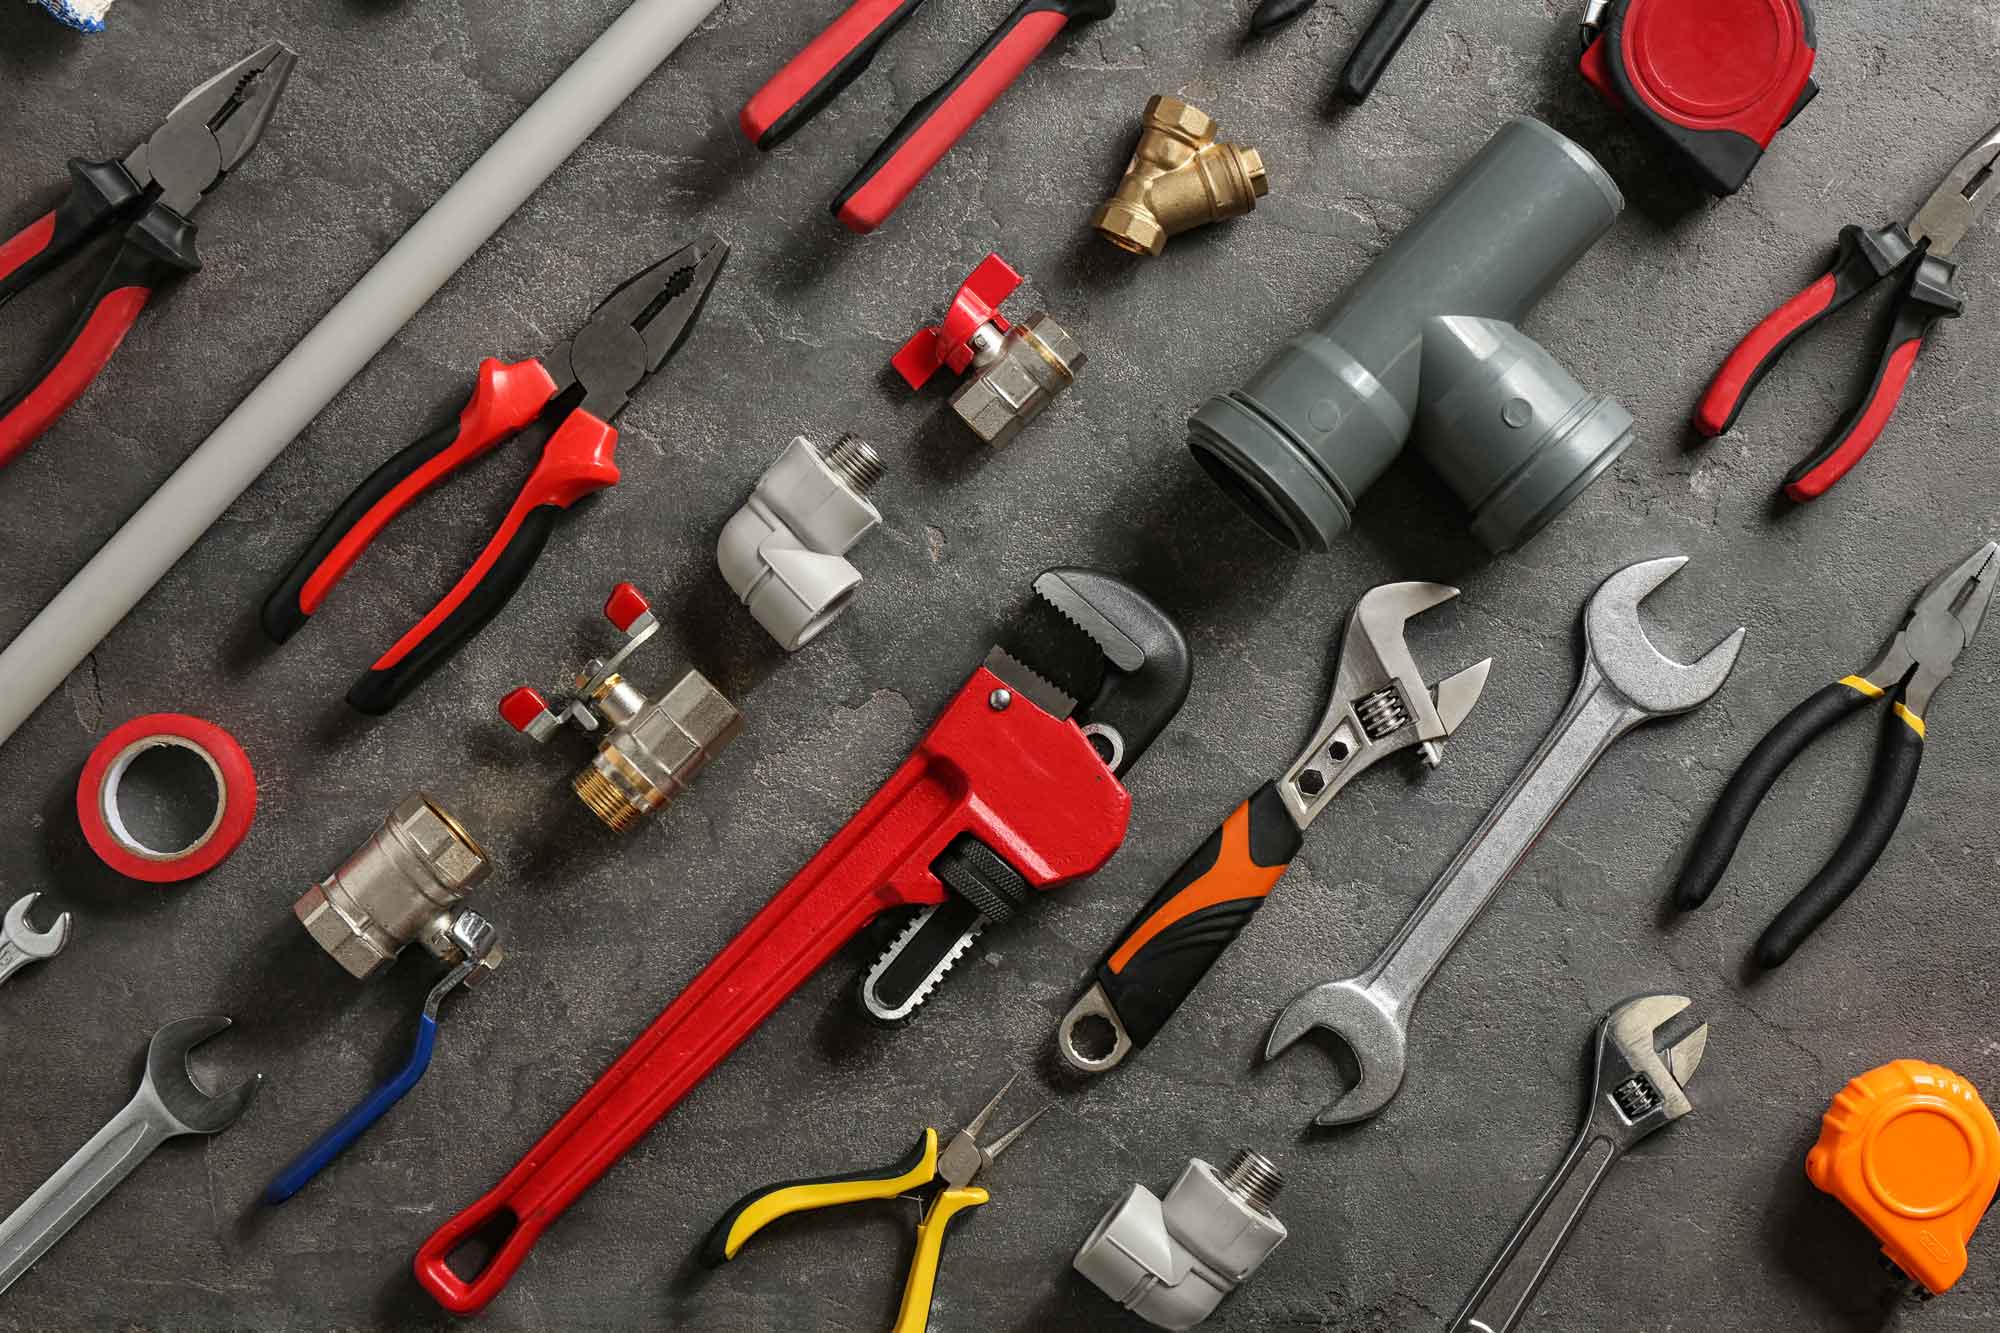 10 Must-Have Plumbing Tools